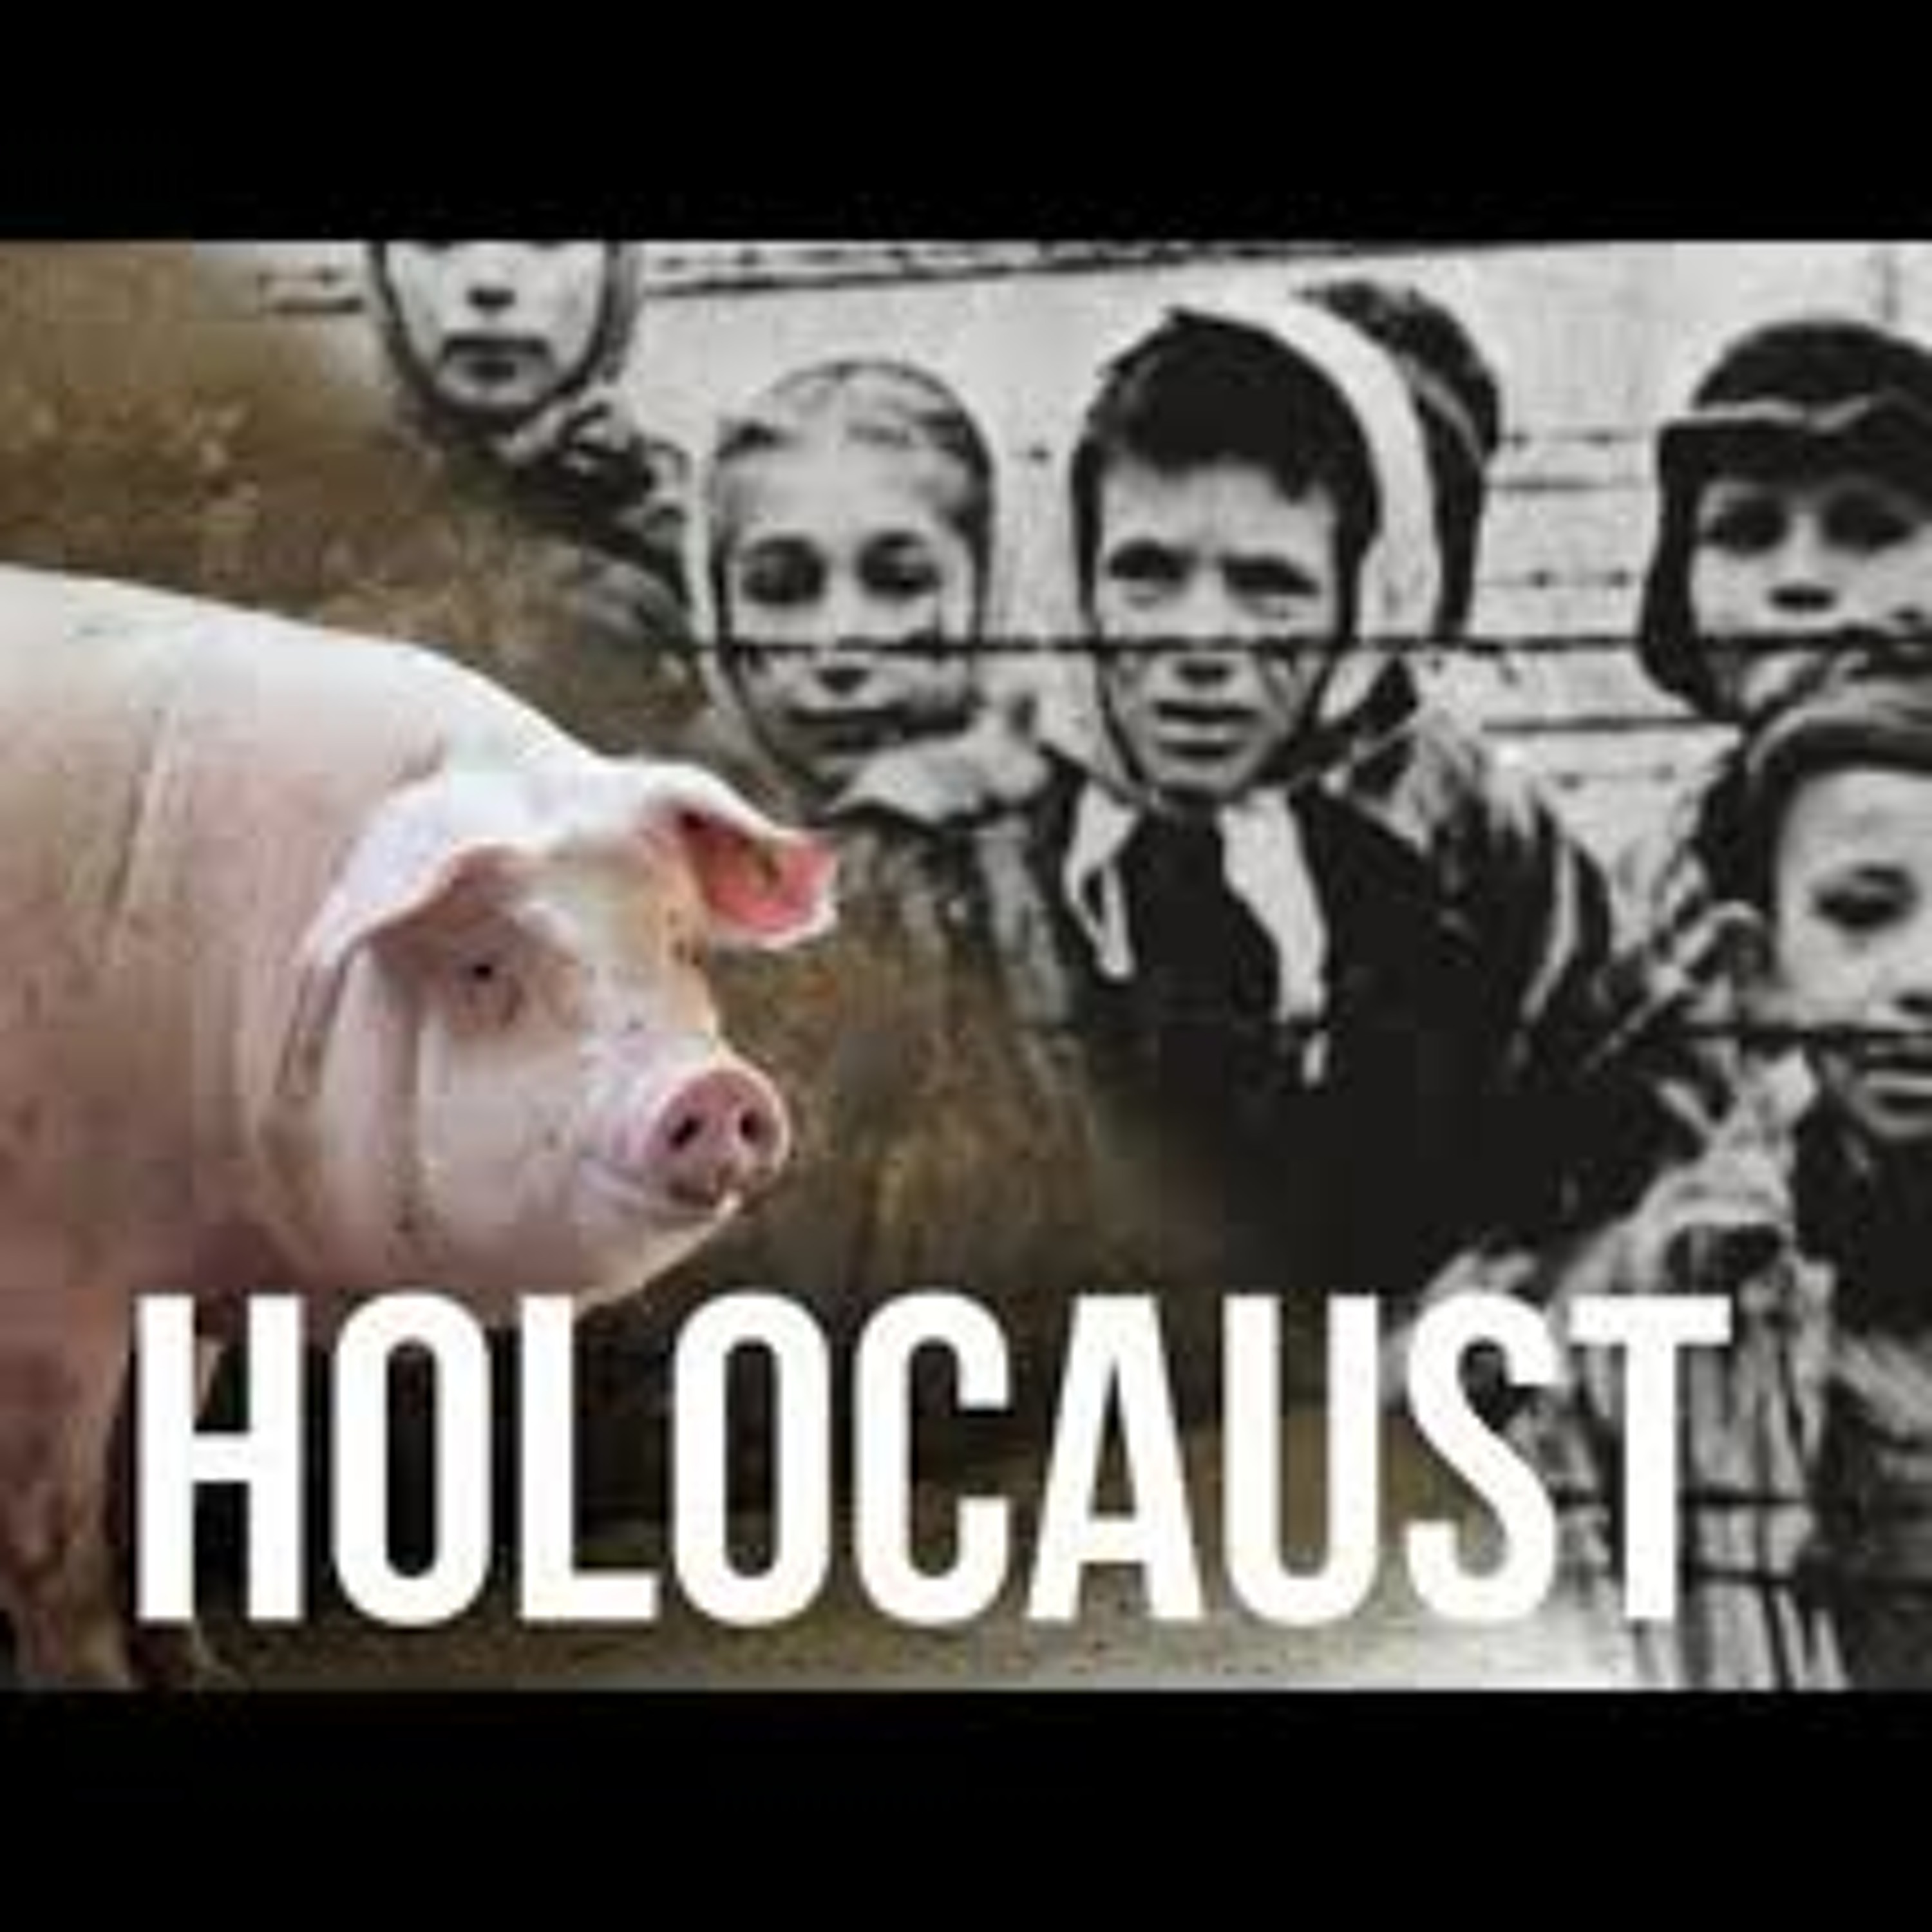 A HOLOCAUST SURVIVOR, Now VEGAN Activist - Is There A Line Between Animal And Human Suffering